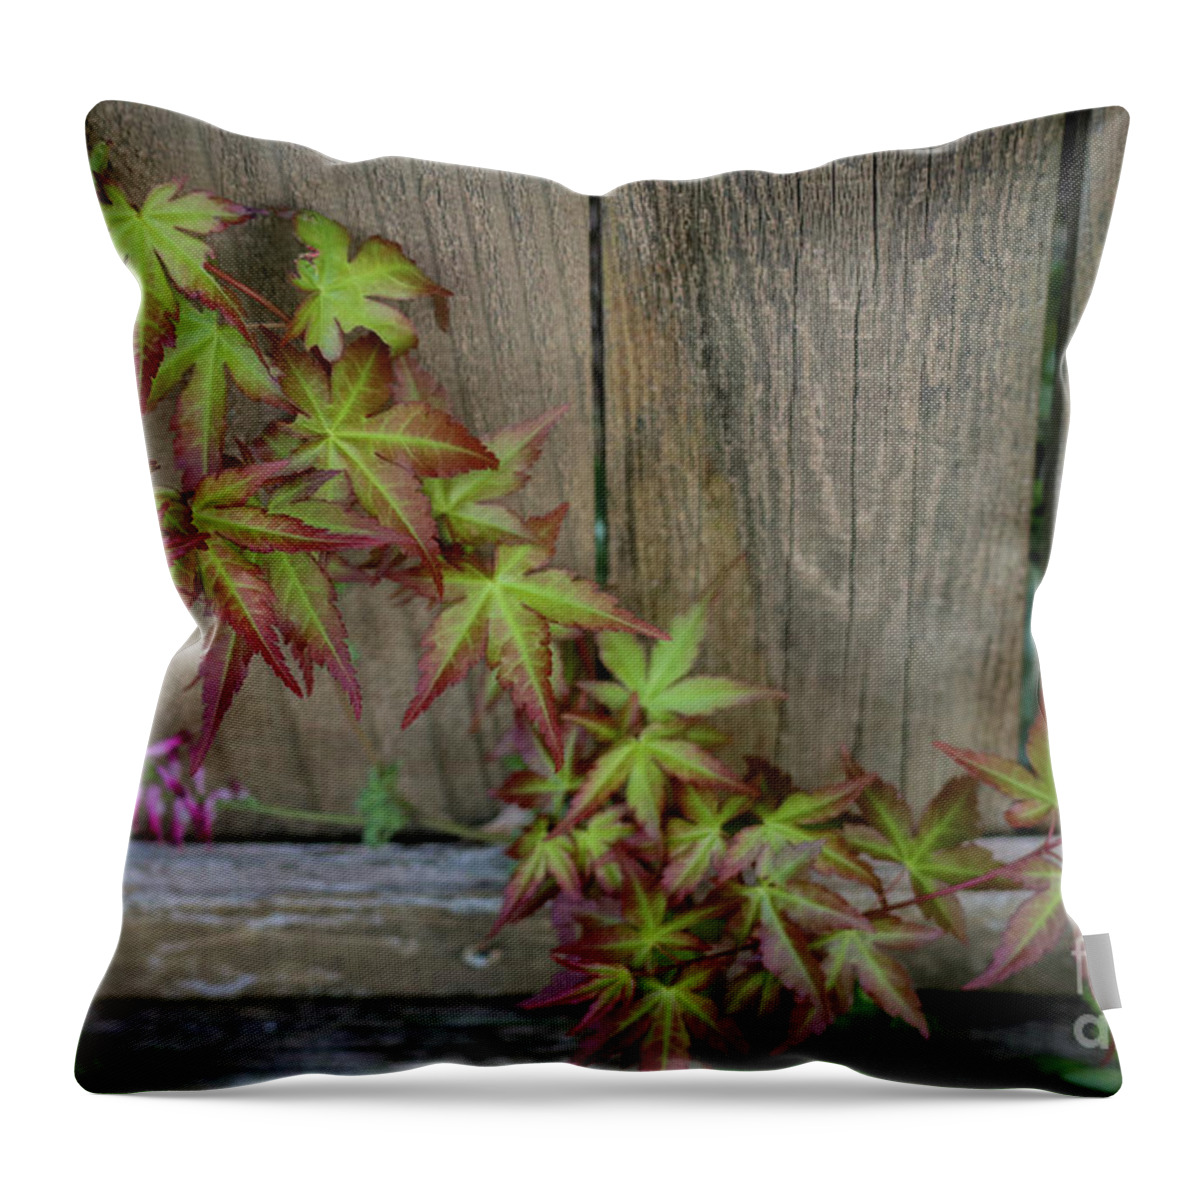 Vine Throw Pillow featuring the photograph Finding the Way by D Lee